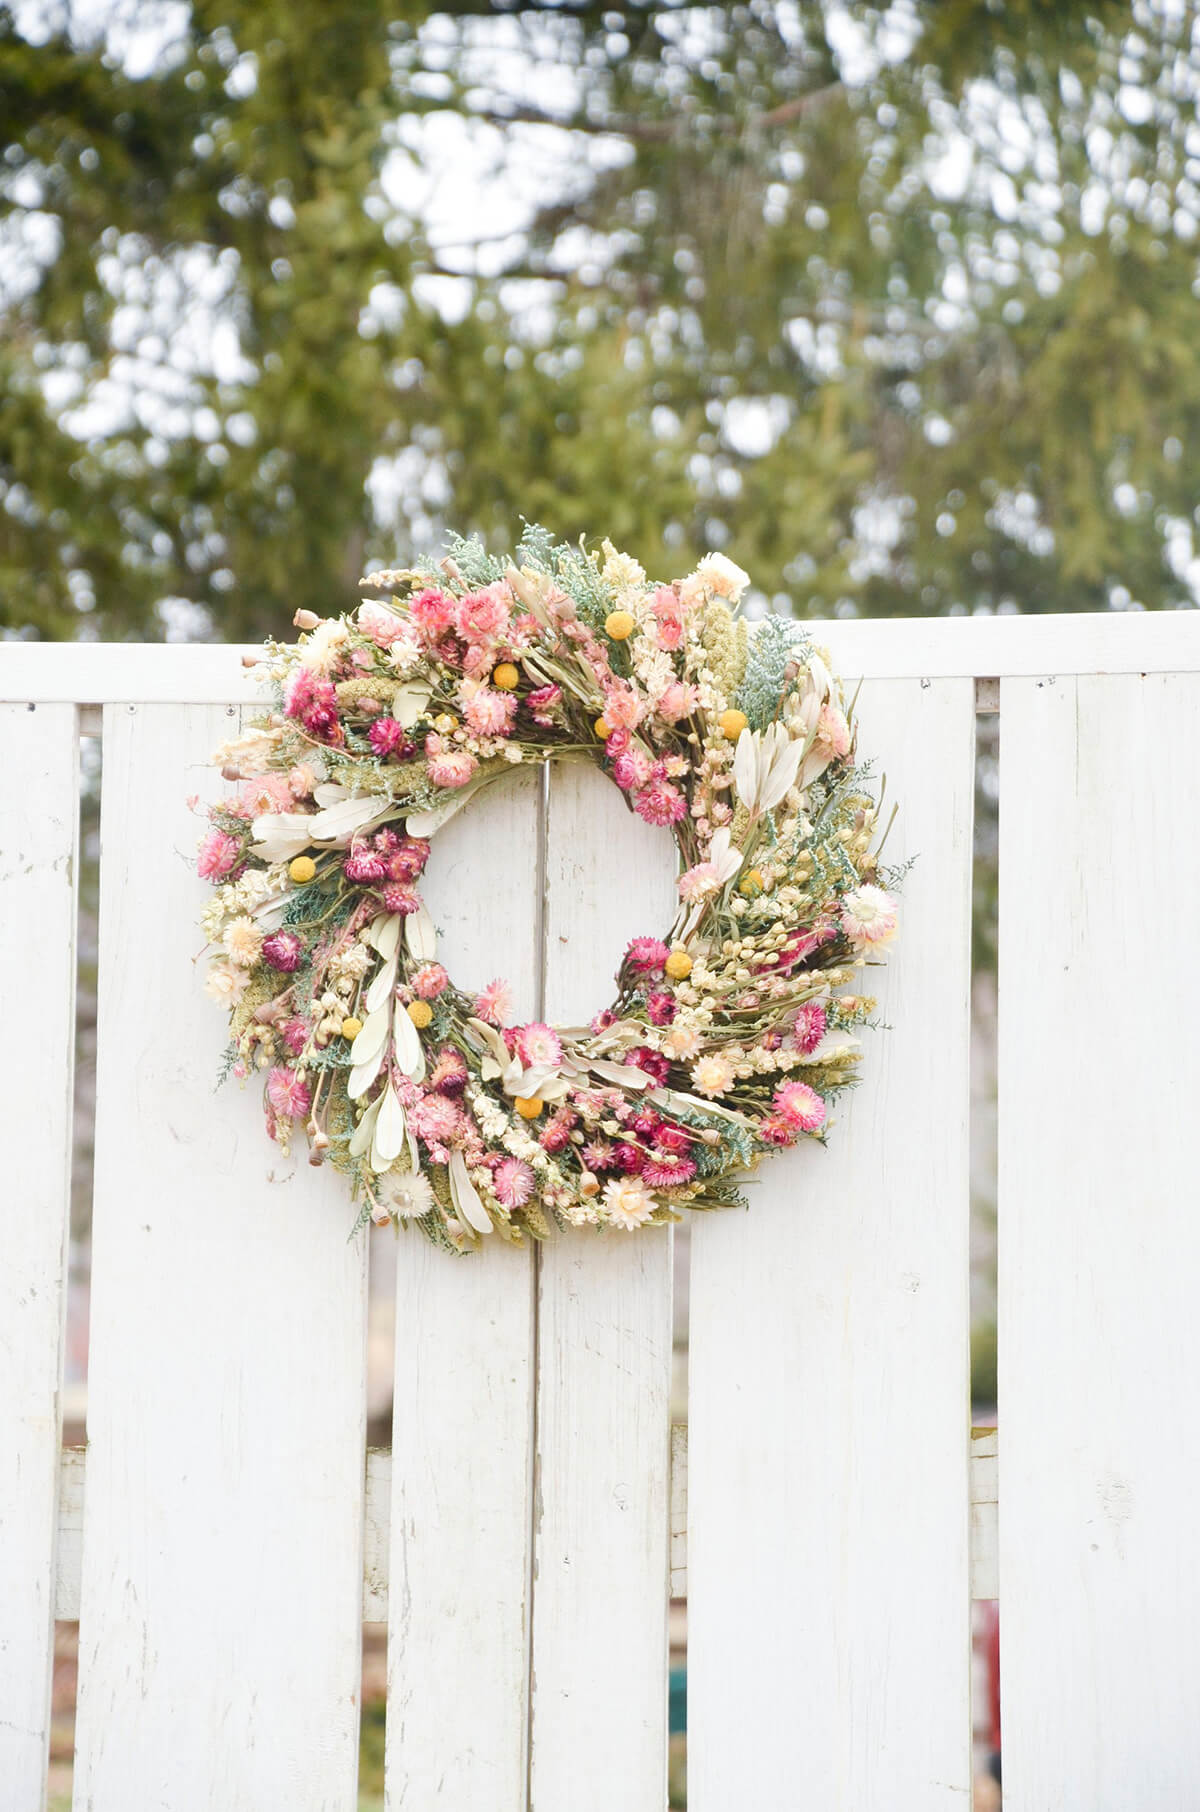 The Most Beautiful Rustic Wildflower Wreath